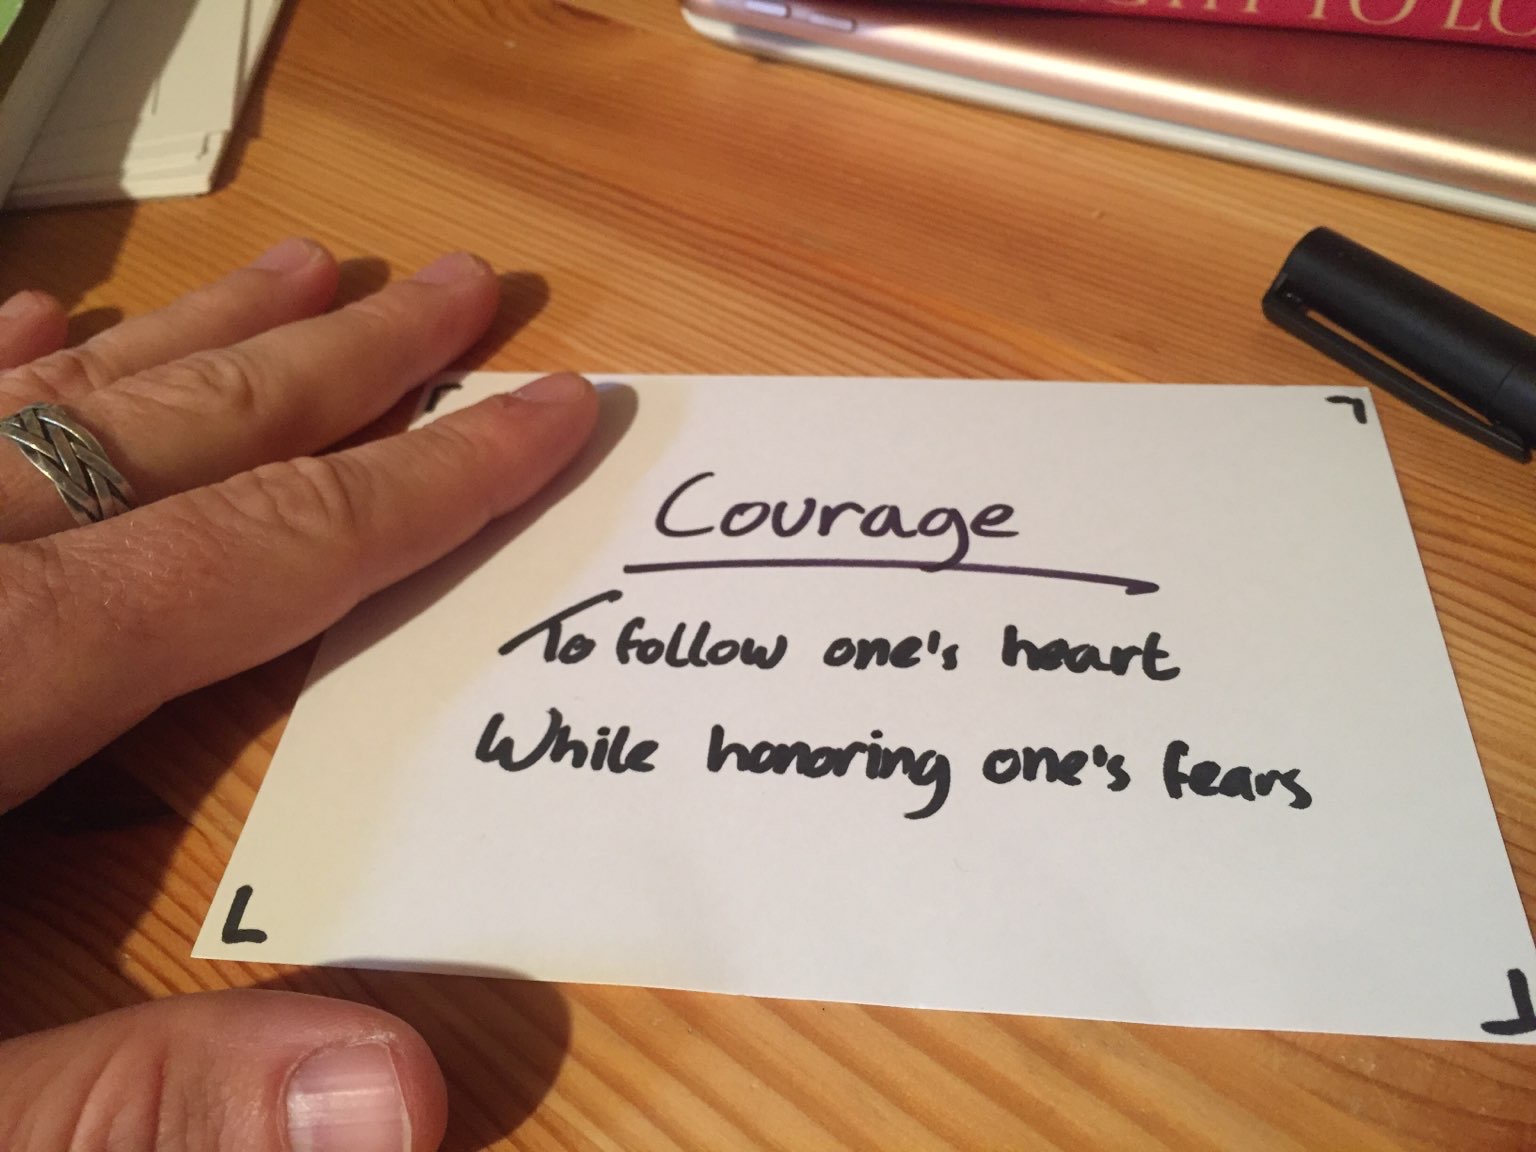 A sign that reads: Courage to follow one's heart while honoring one's fears